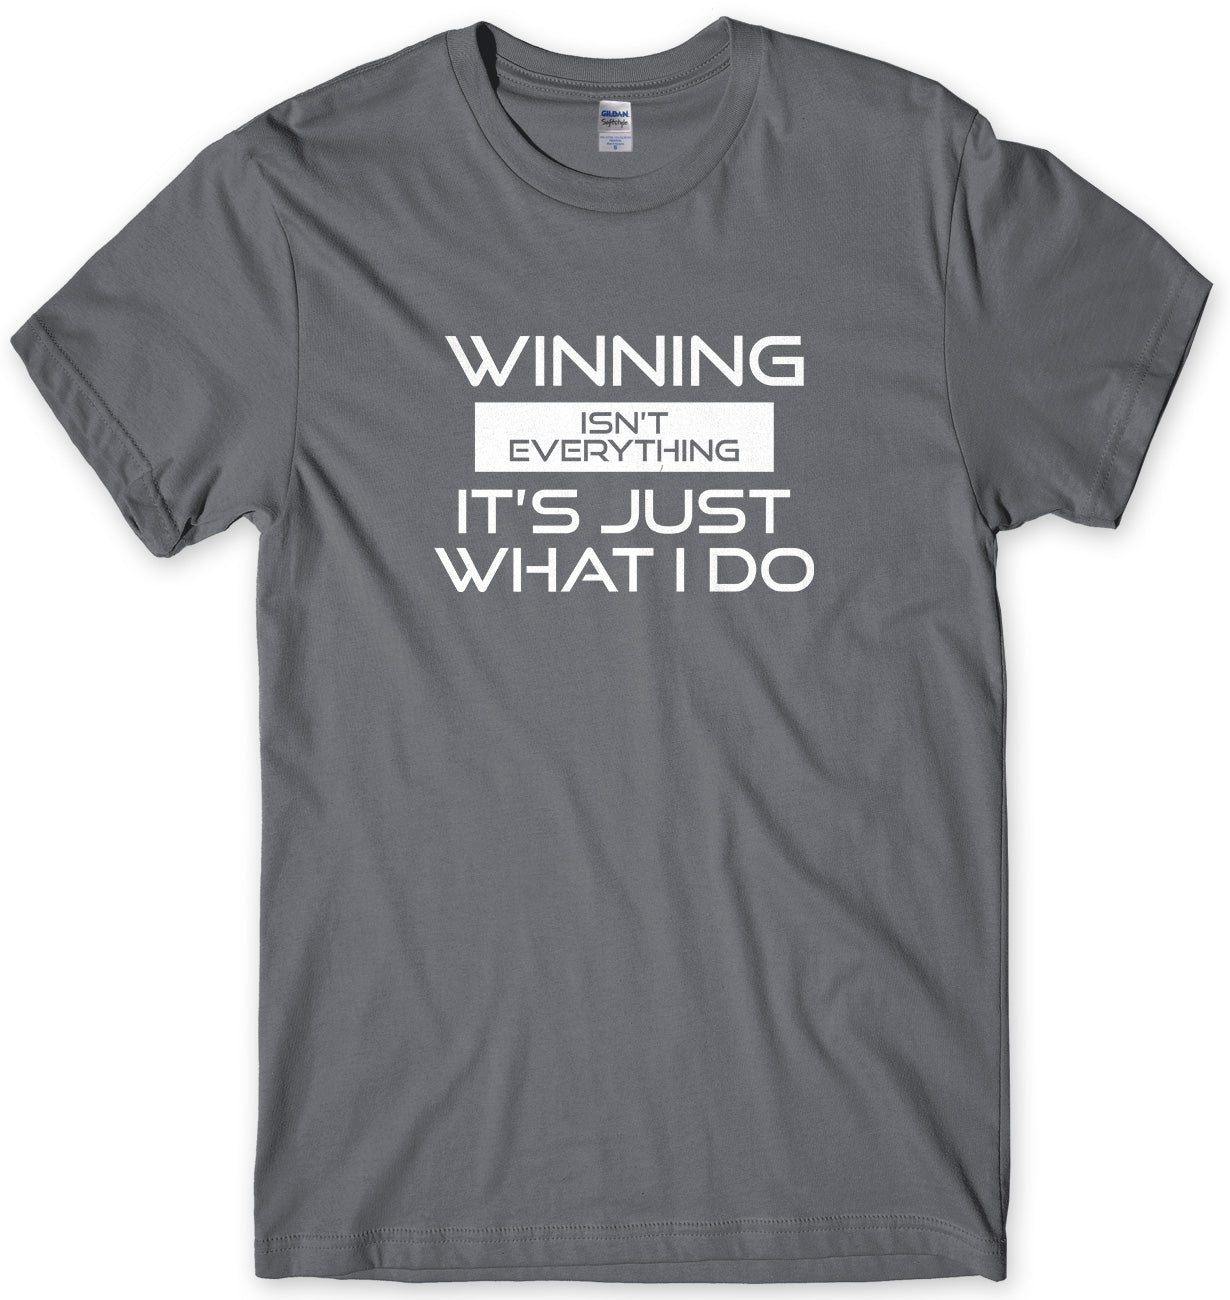 Winning Isn't Everything It's Just What I Do Mens Unisex Style T-Shirt